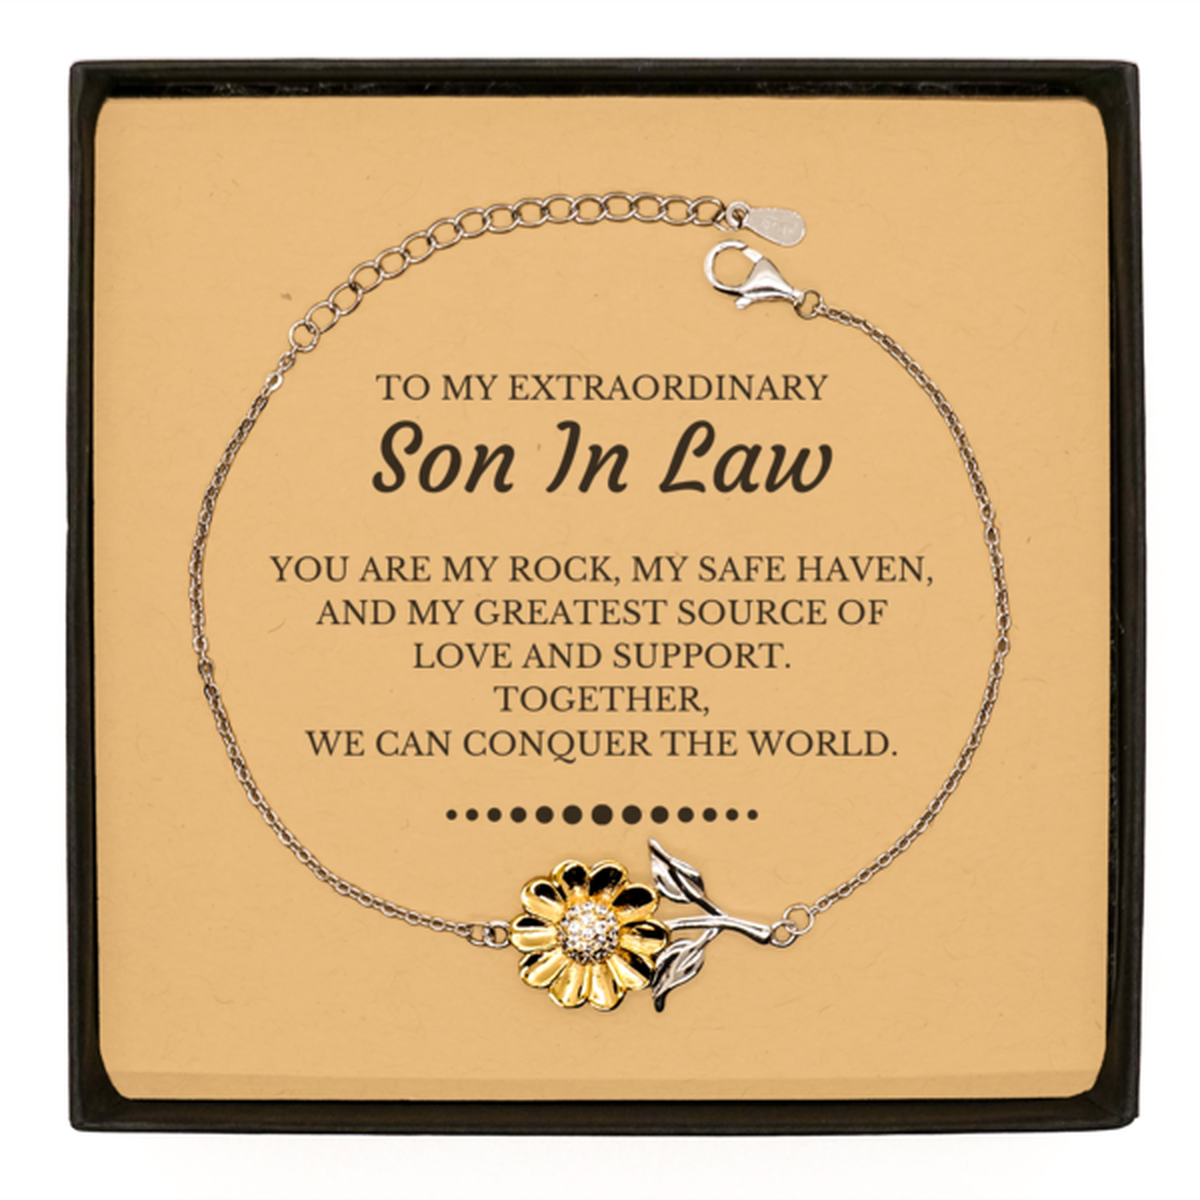 To My Extraordinary Son In Law Gifts, Together, we can conquer the world, Birthday Sunflower Bracelet For Son In Law, Christmas Gifts For Son In Law